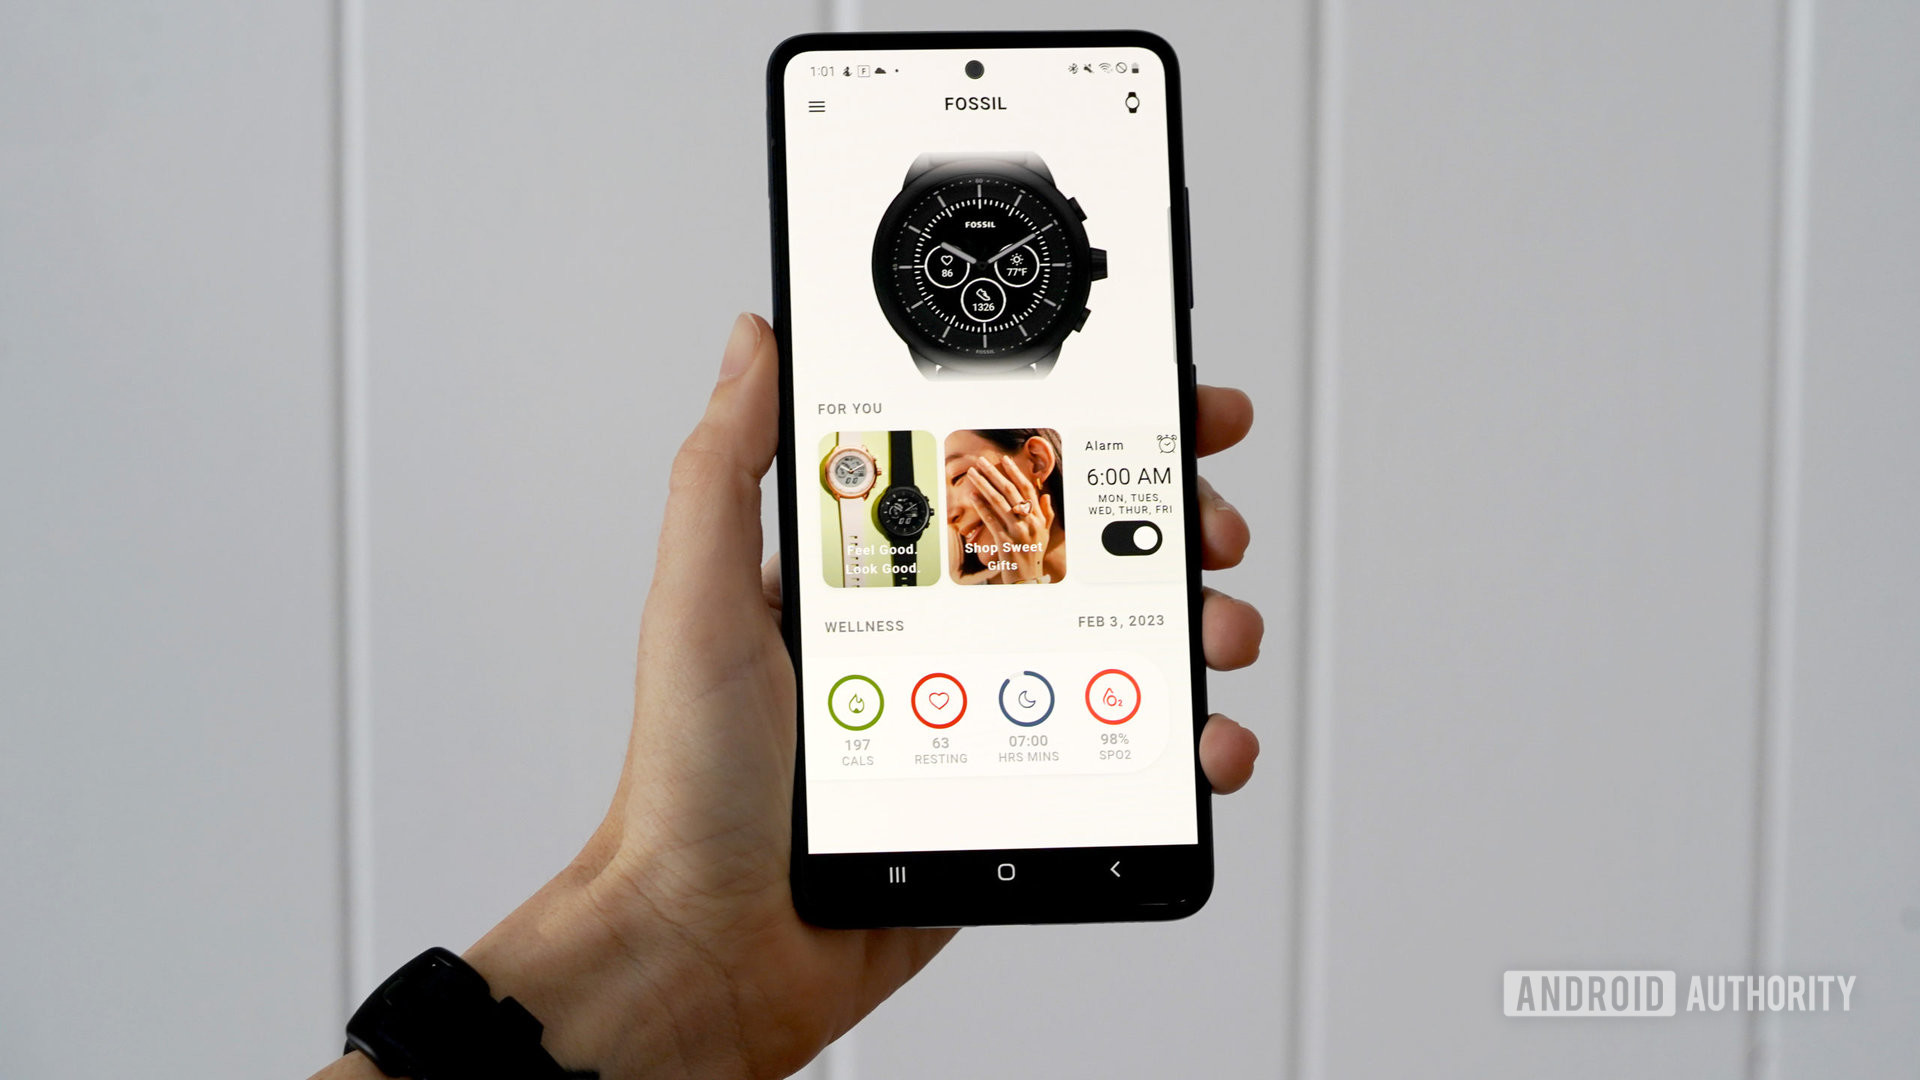 A Samsung Galaxy A51 displays the Fossil Smartwatches App.